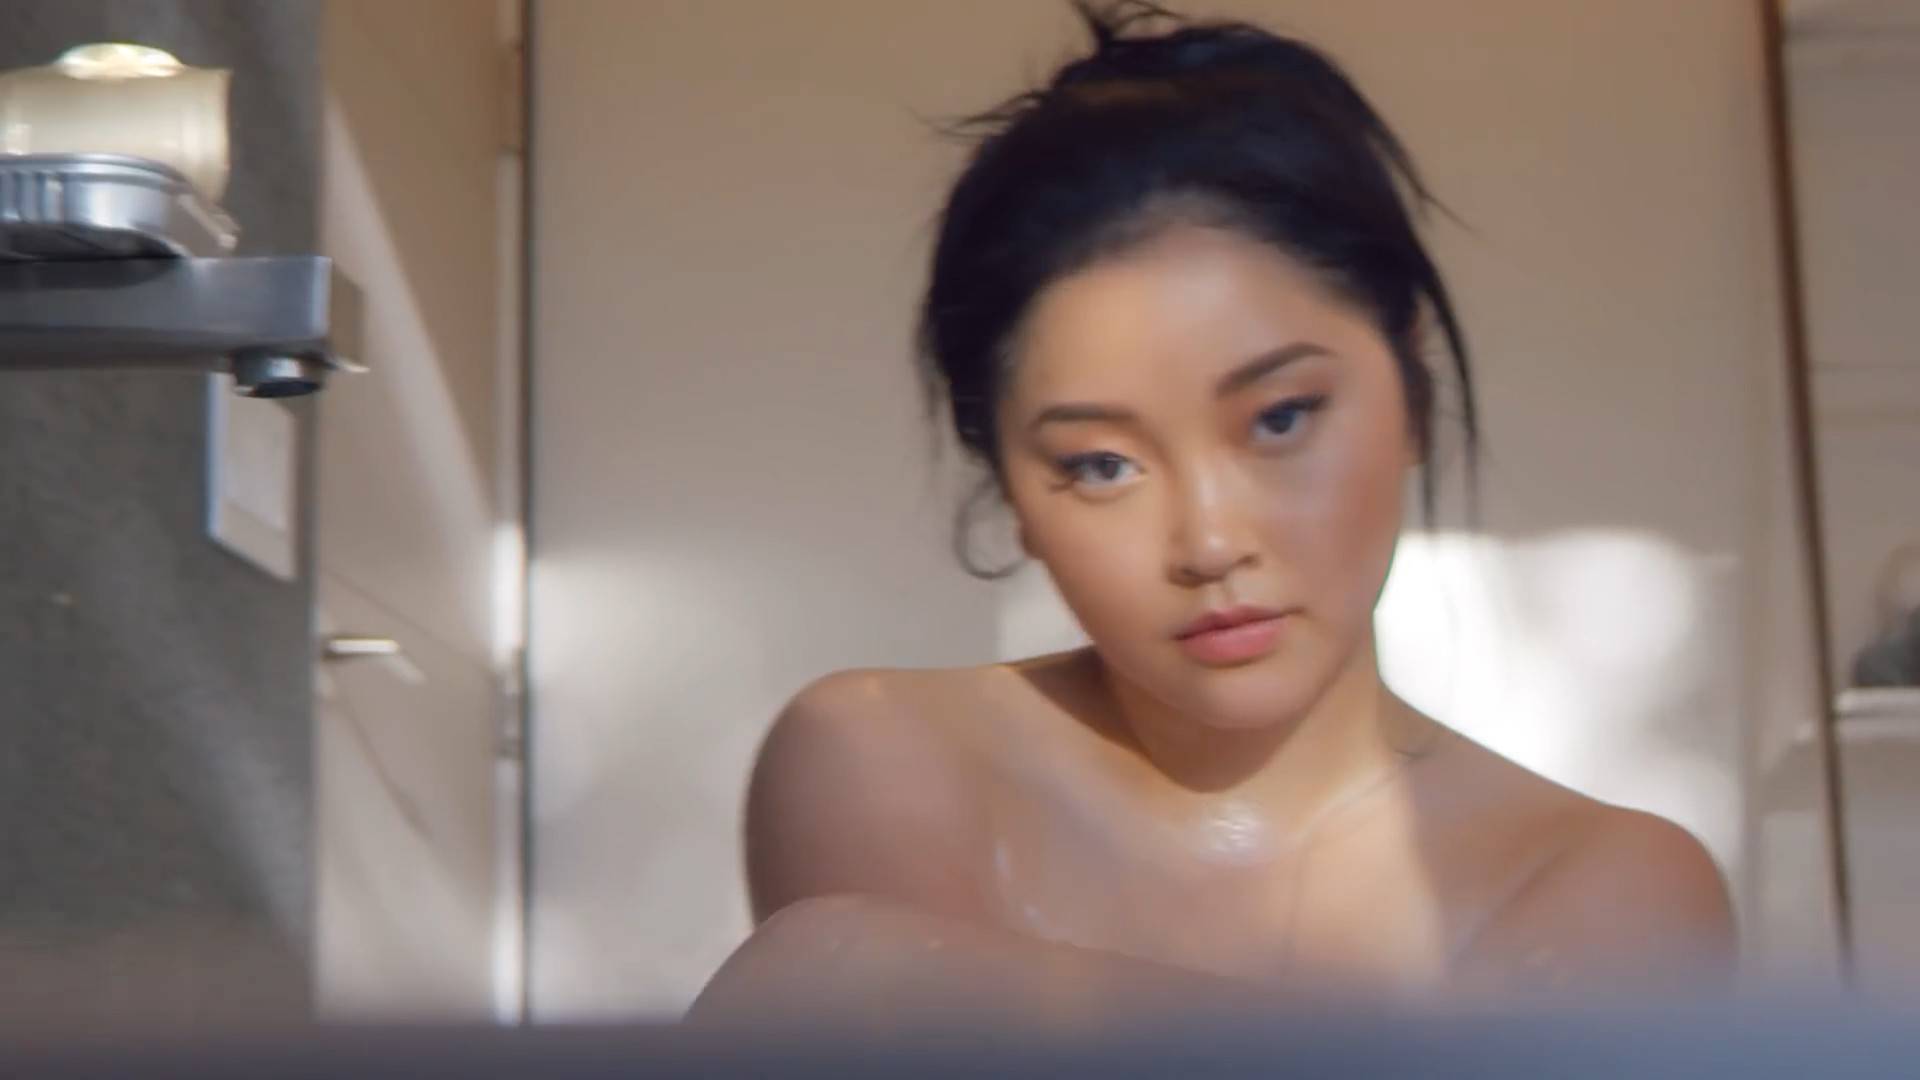 For Real' music video Lana Condor Fan.